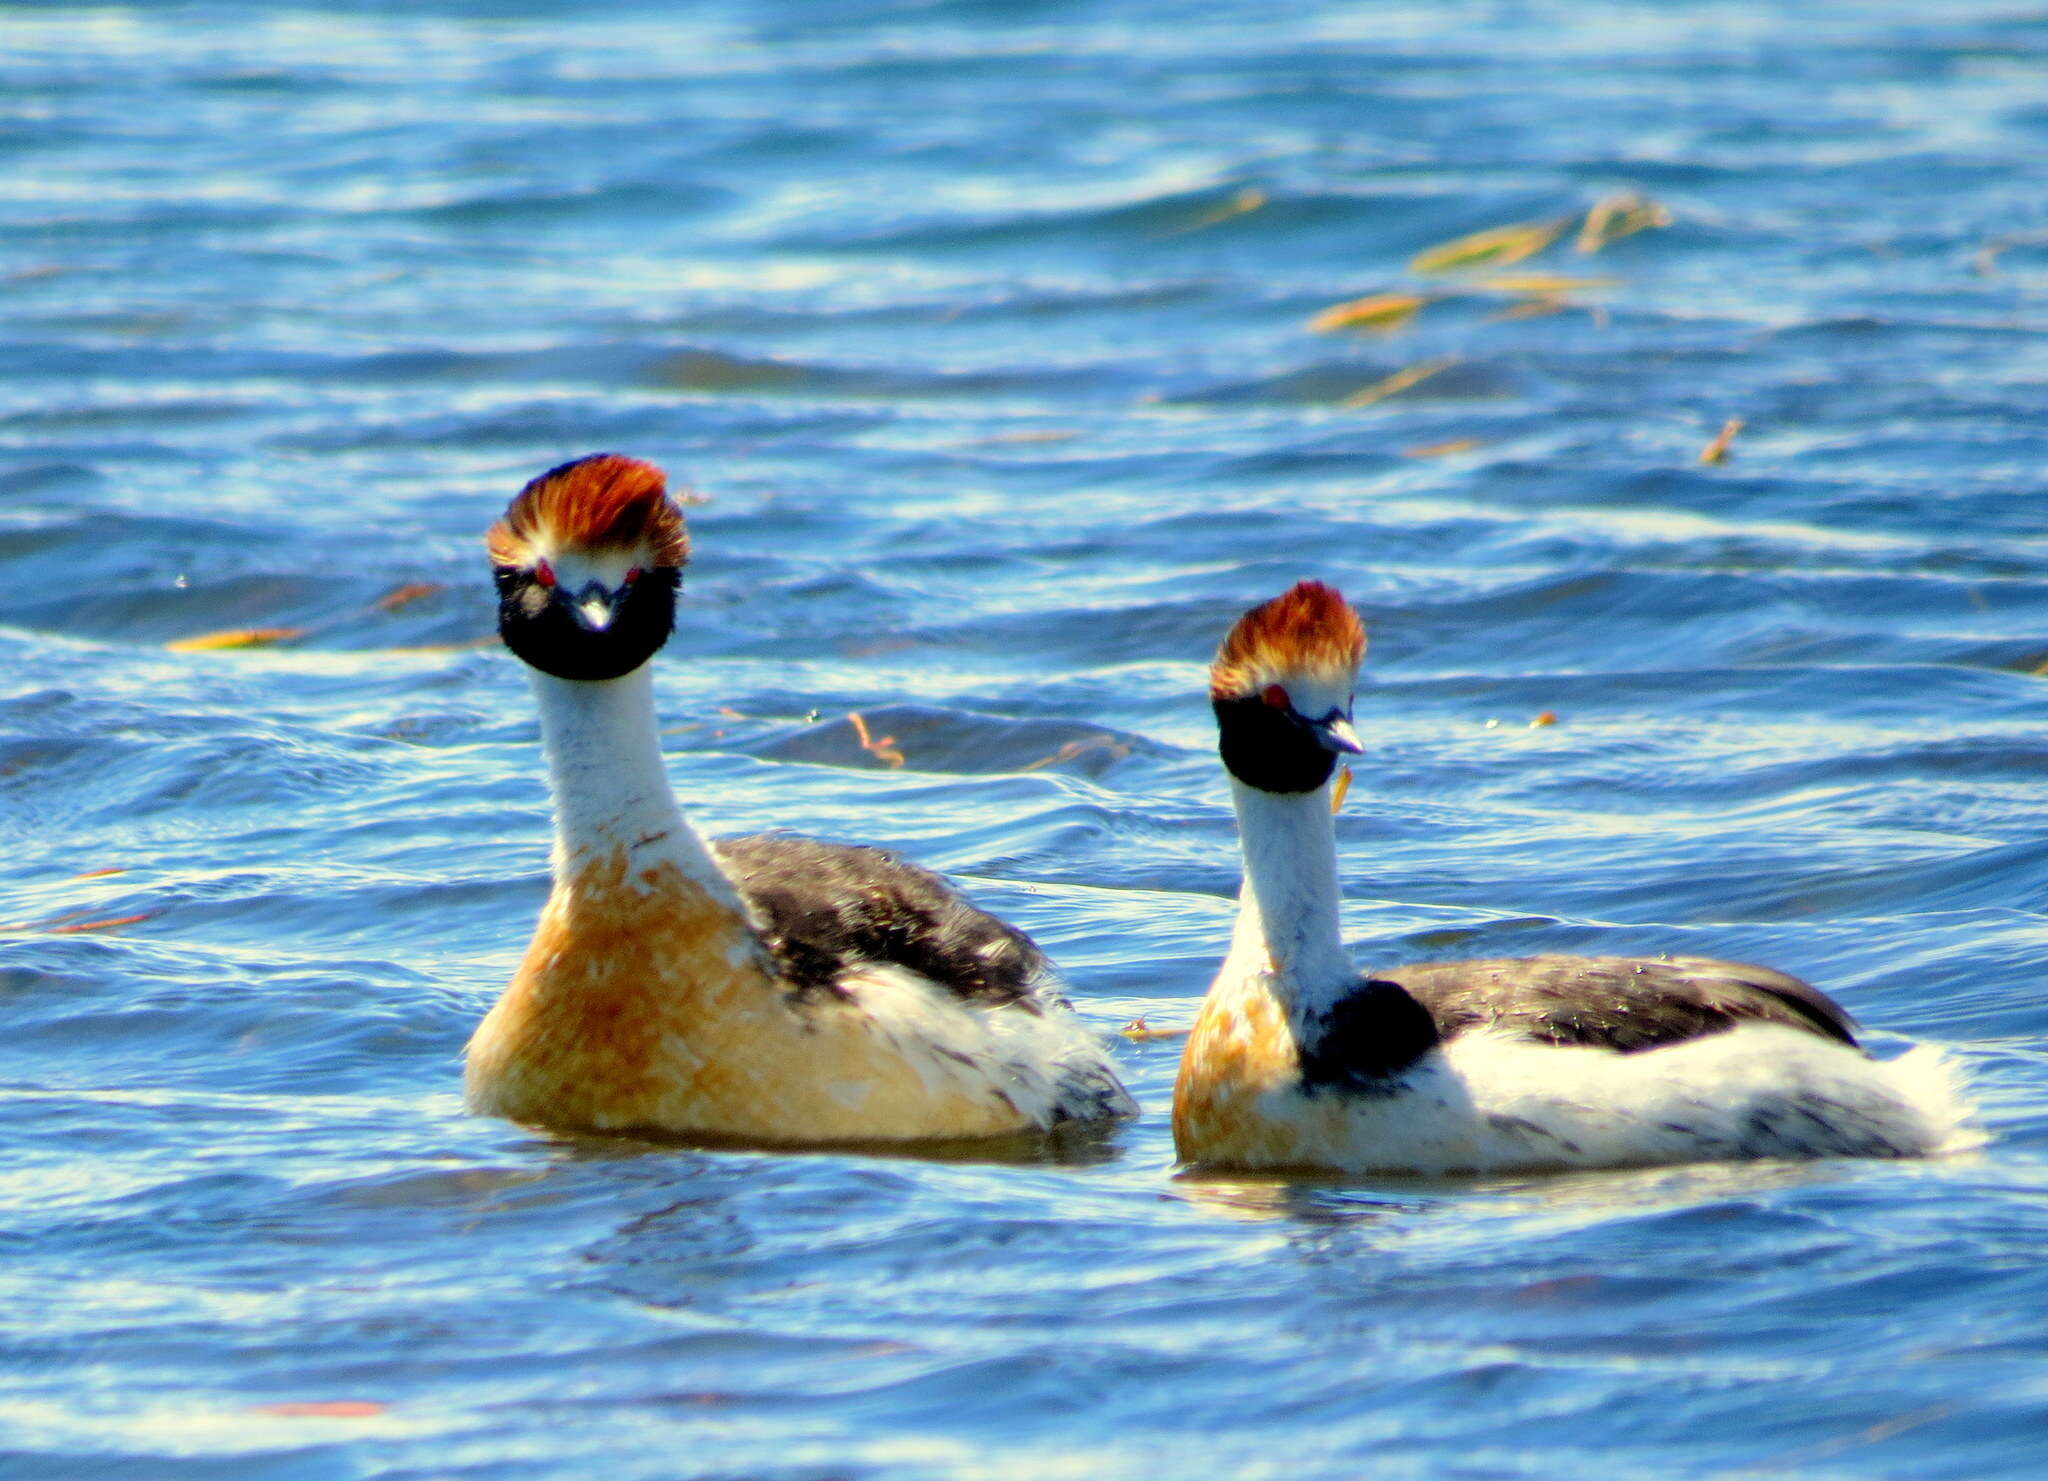 Image of Hooded Grebe